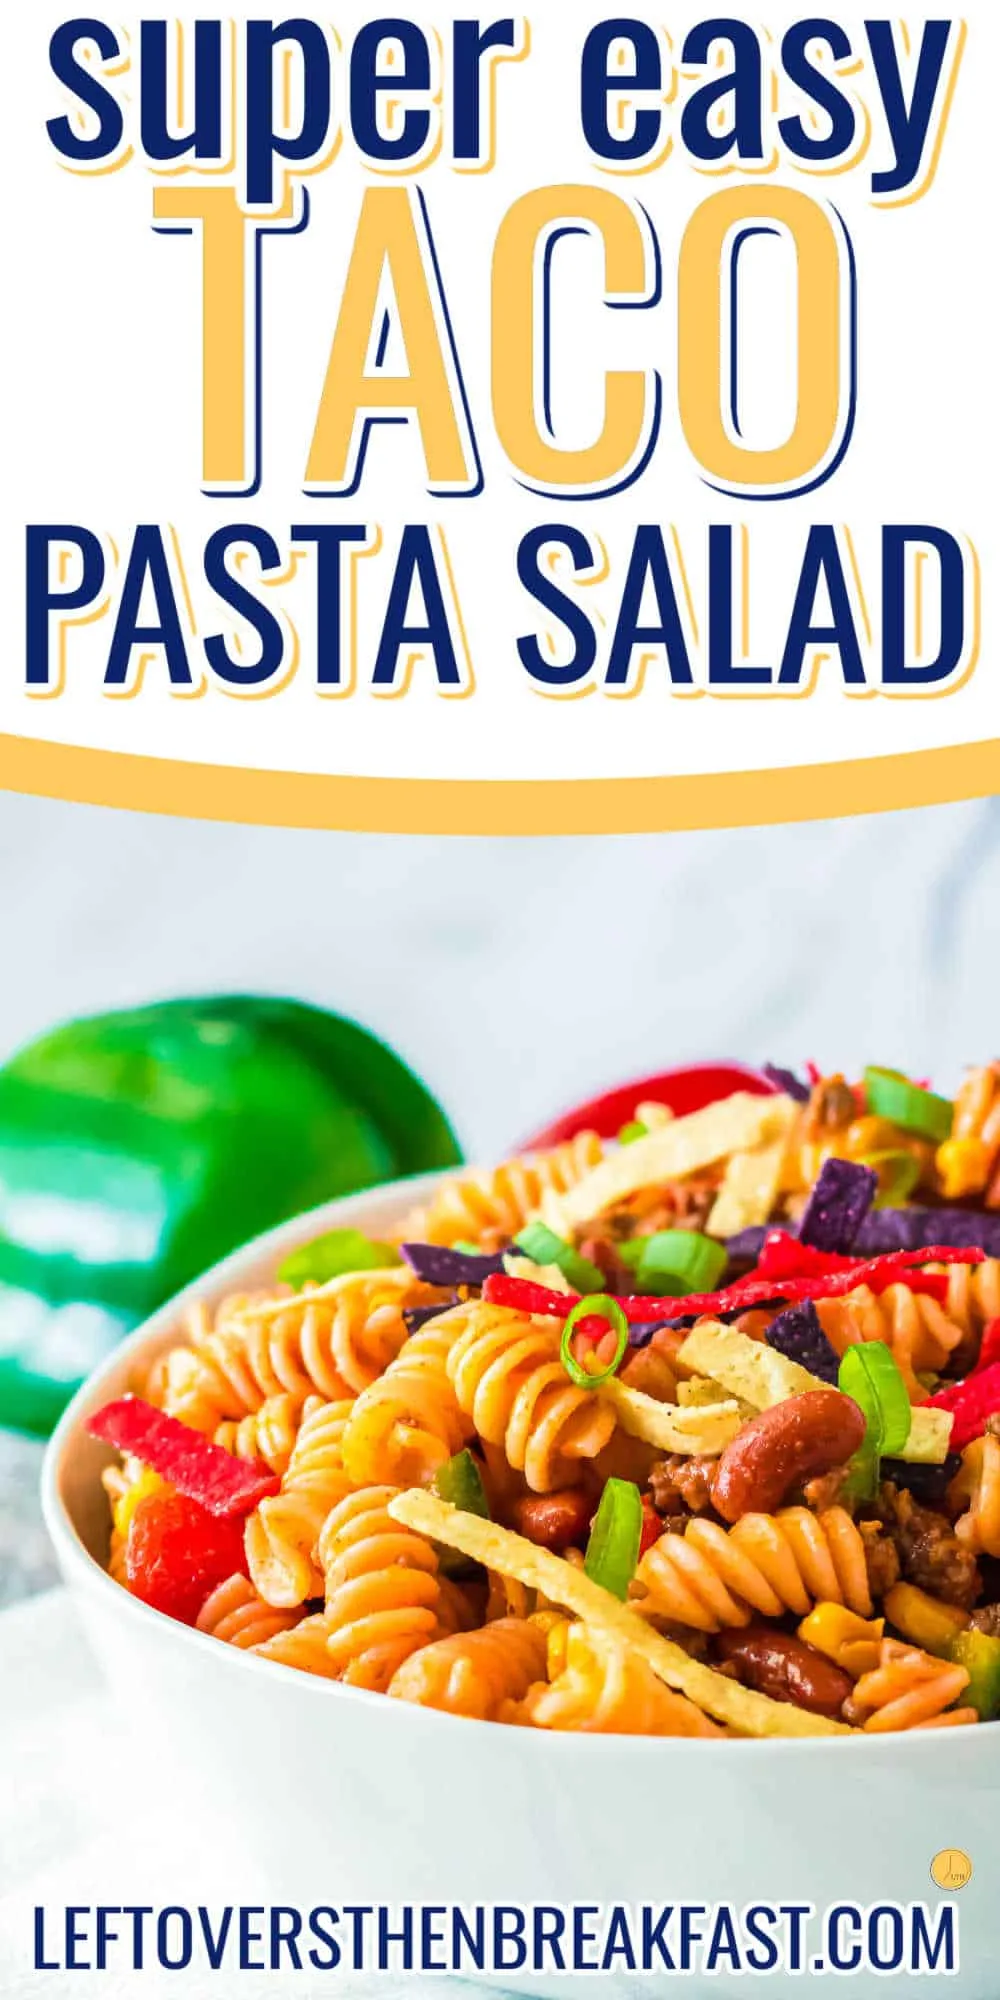 side view of bowl of pasta salad with text "super easy taco pasta salad"